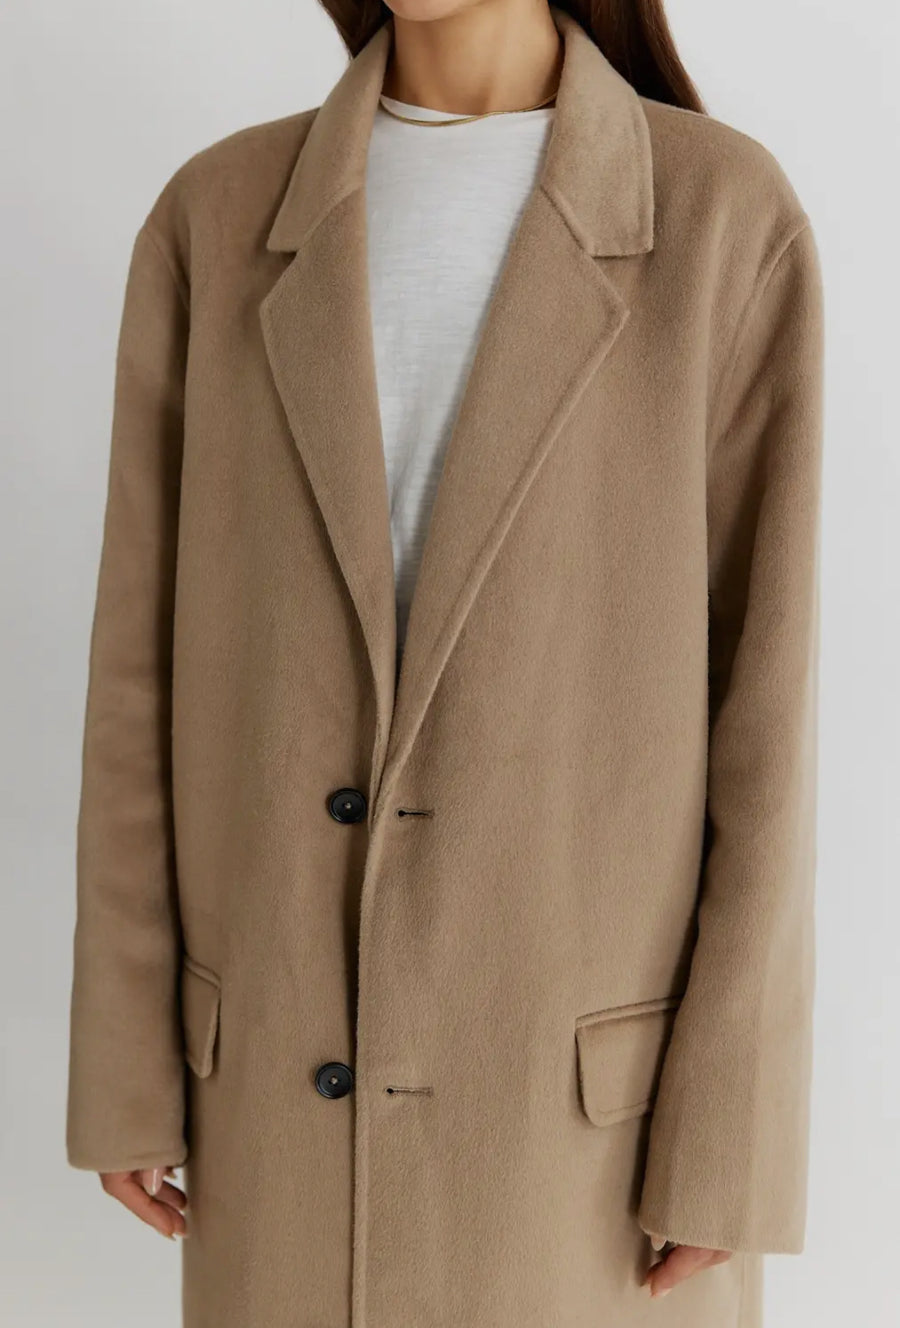 The Spence Coat